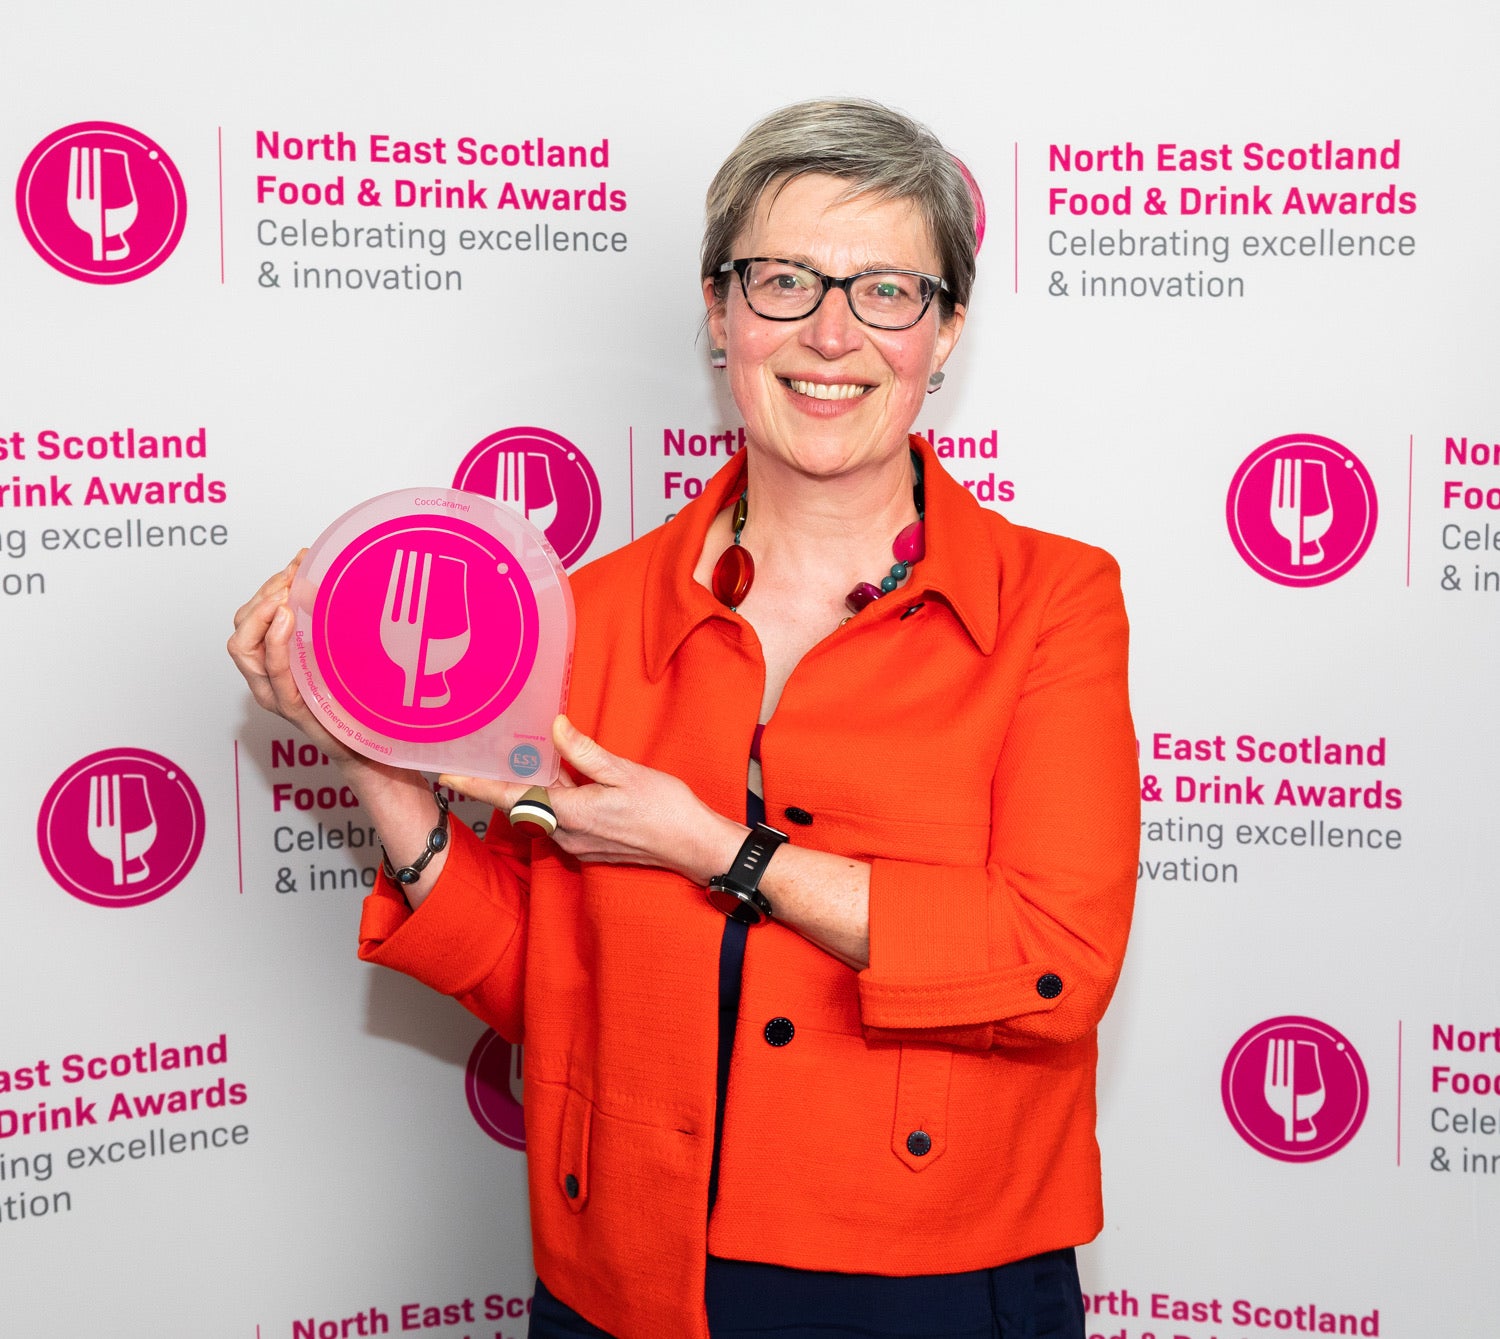 Helen with our award